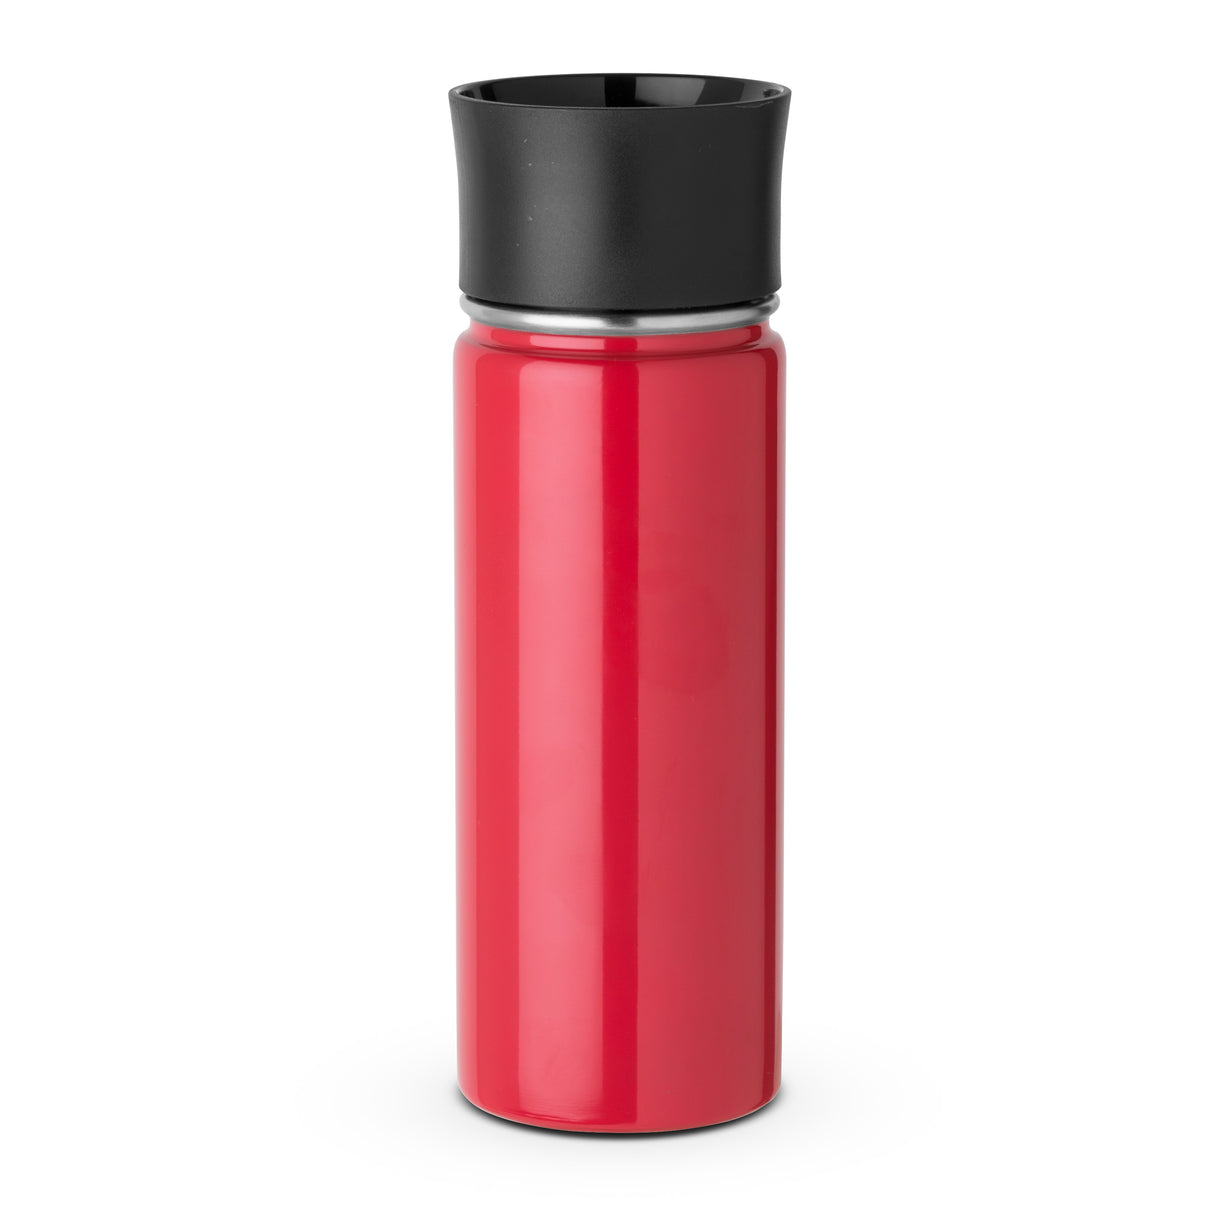 Nelson Insulated Water Bottle - 17 Oz.